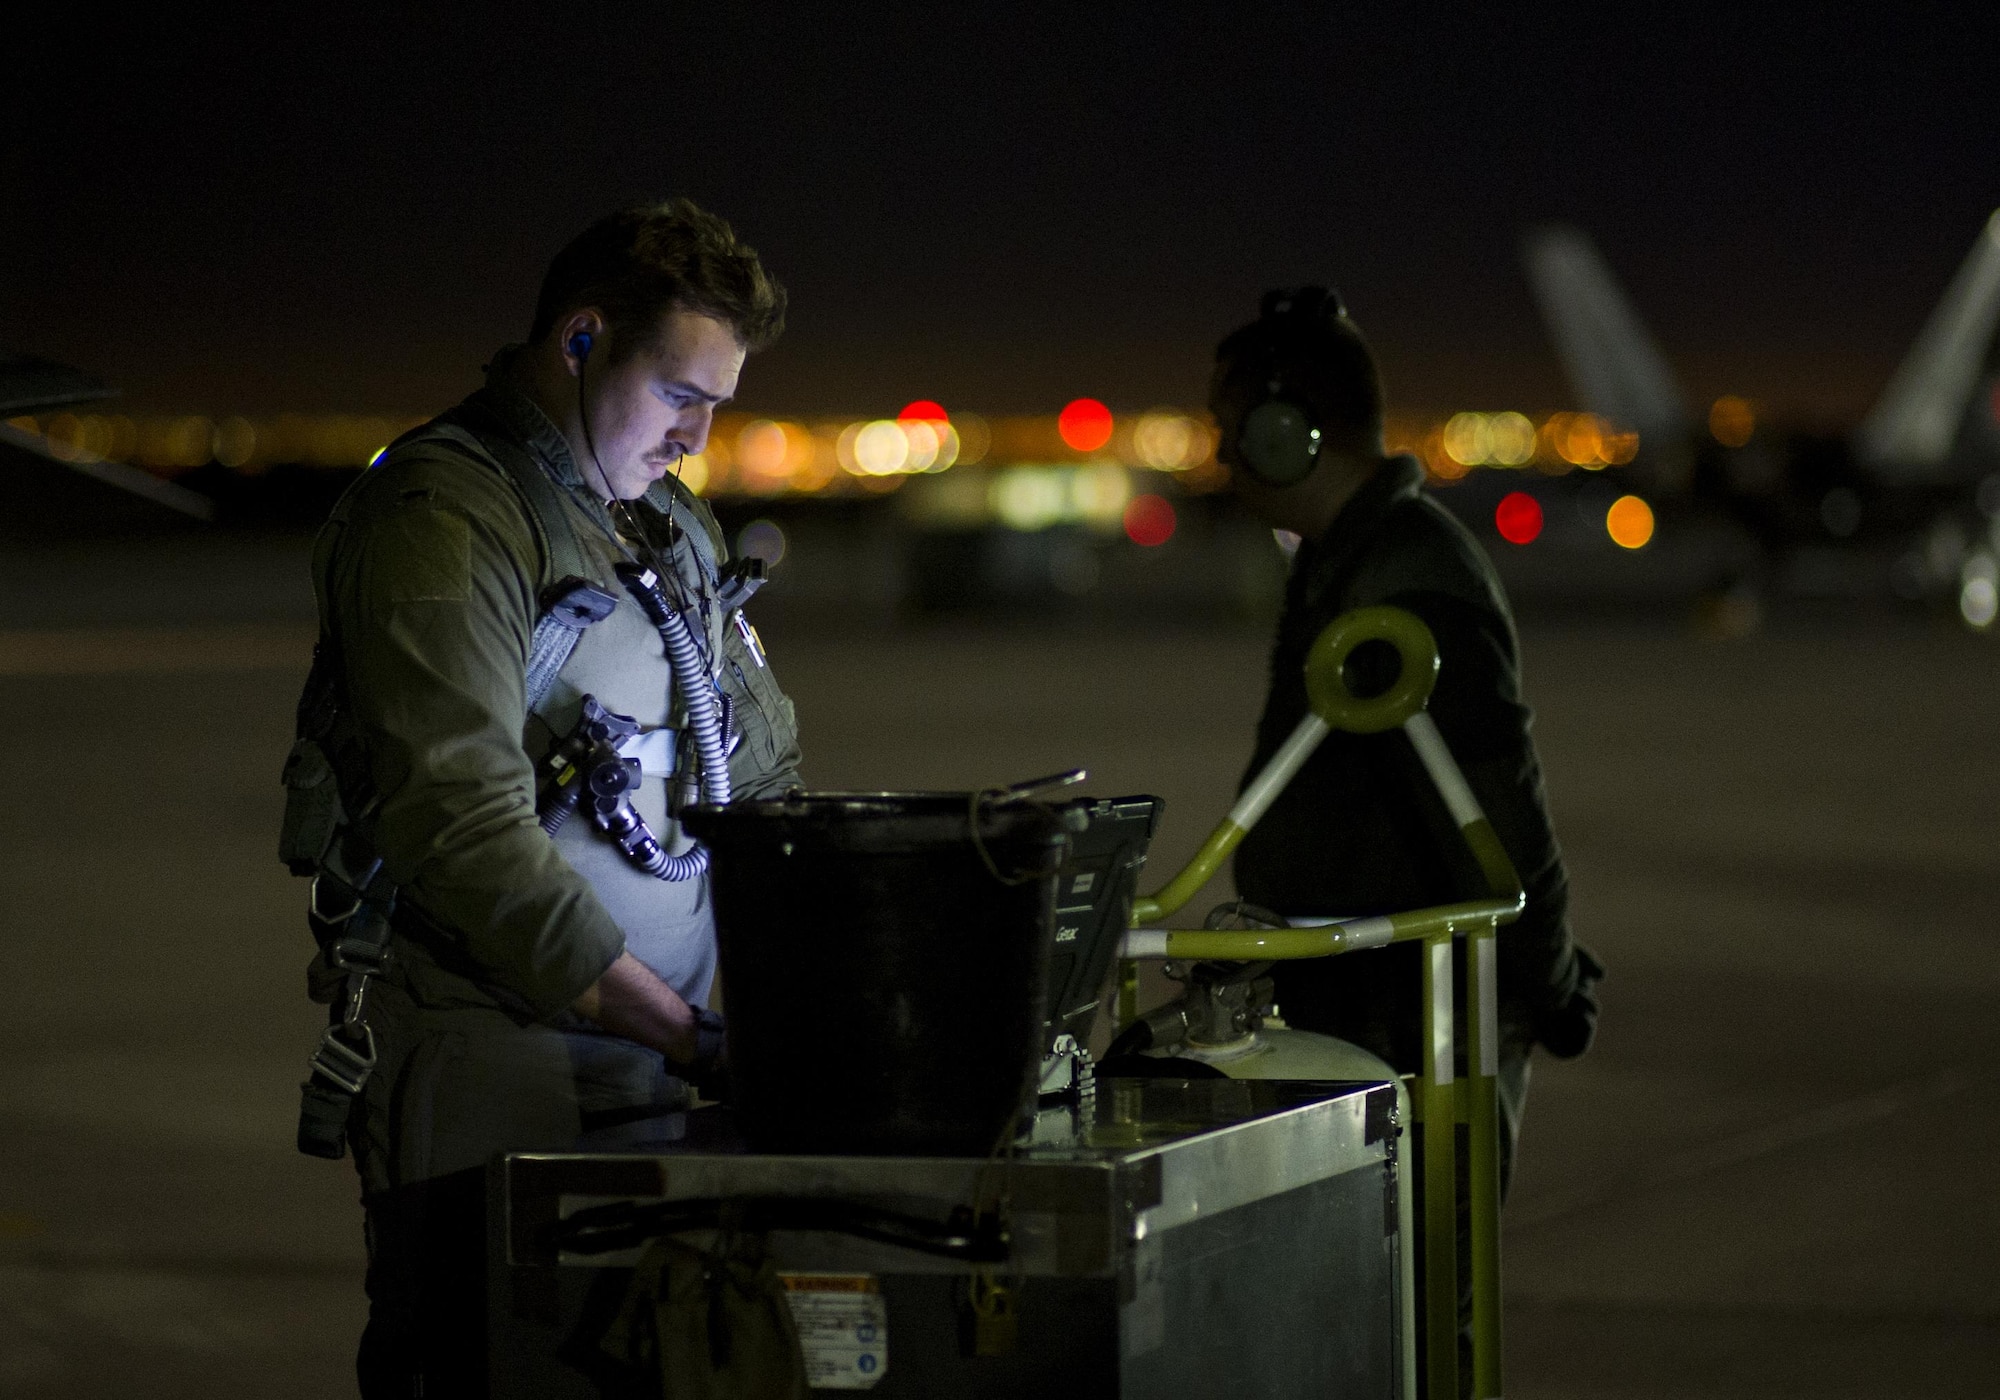 First Lt. Douglas Foss, a 95th Fighter Squadron F-22 Raptor pilot, goes through preflight procedures during Red Flag 16-1, Jan. 26, 2016, at Nellis Air Force Base, Nev. More than 30 squadrons at Red Flag 16-1 worked together, some for the first time, training and preparing for a variety of possible threats. (U.S. Air Force photo/Senior Airman Alex Fox Echols III)